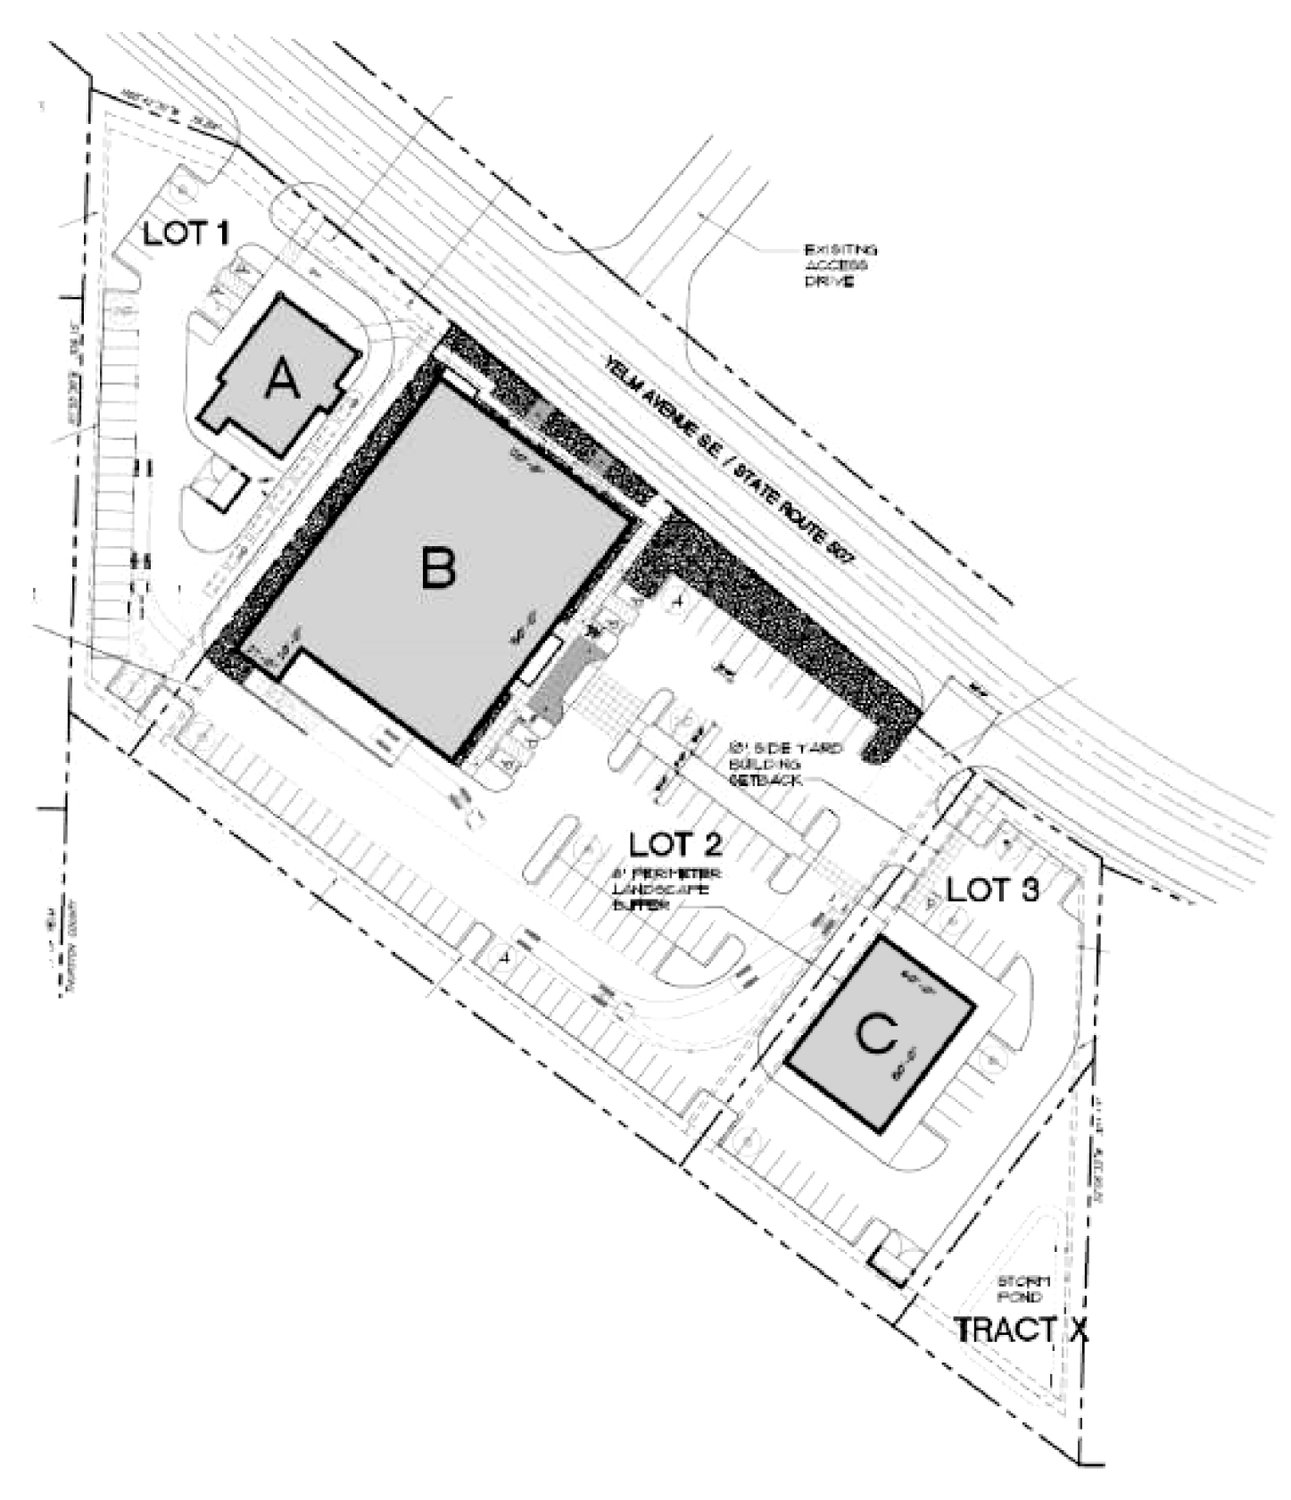 This architect’s drawing shows the layout of a planned Grocery Outlet, fast food restaurant and retail store situated along state Route 507 in Yelm.